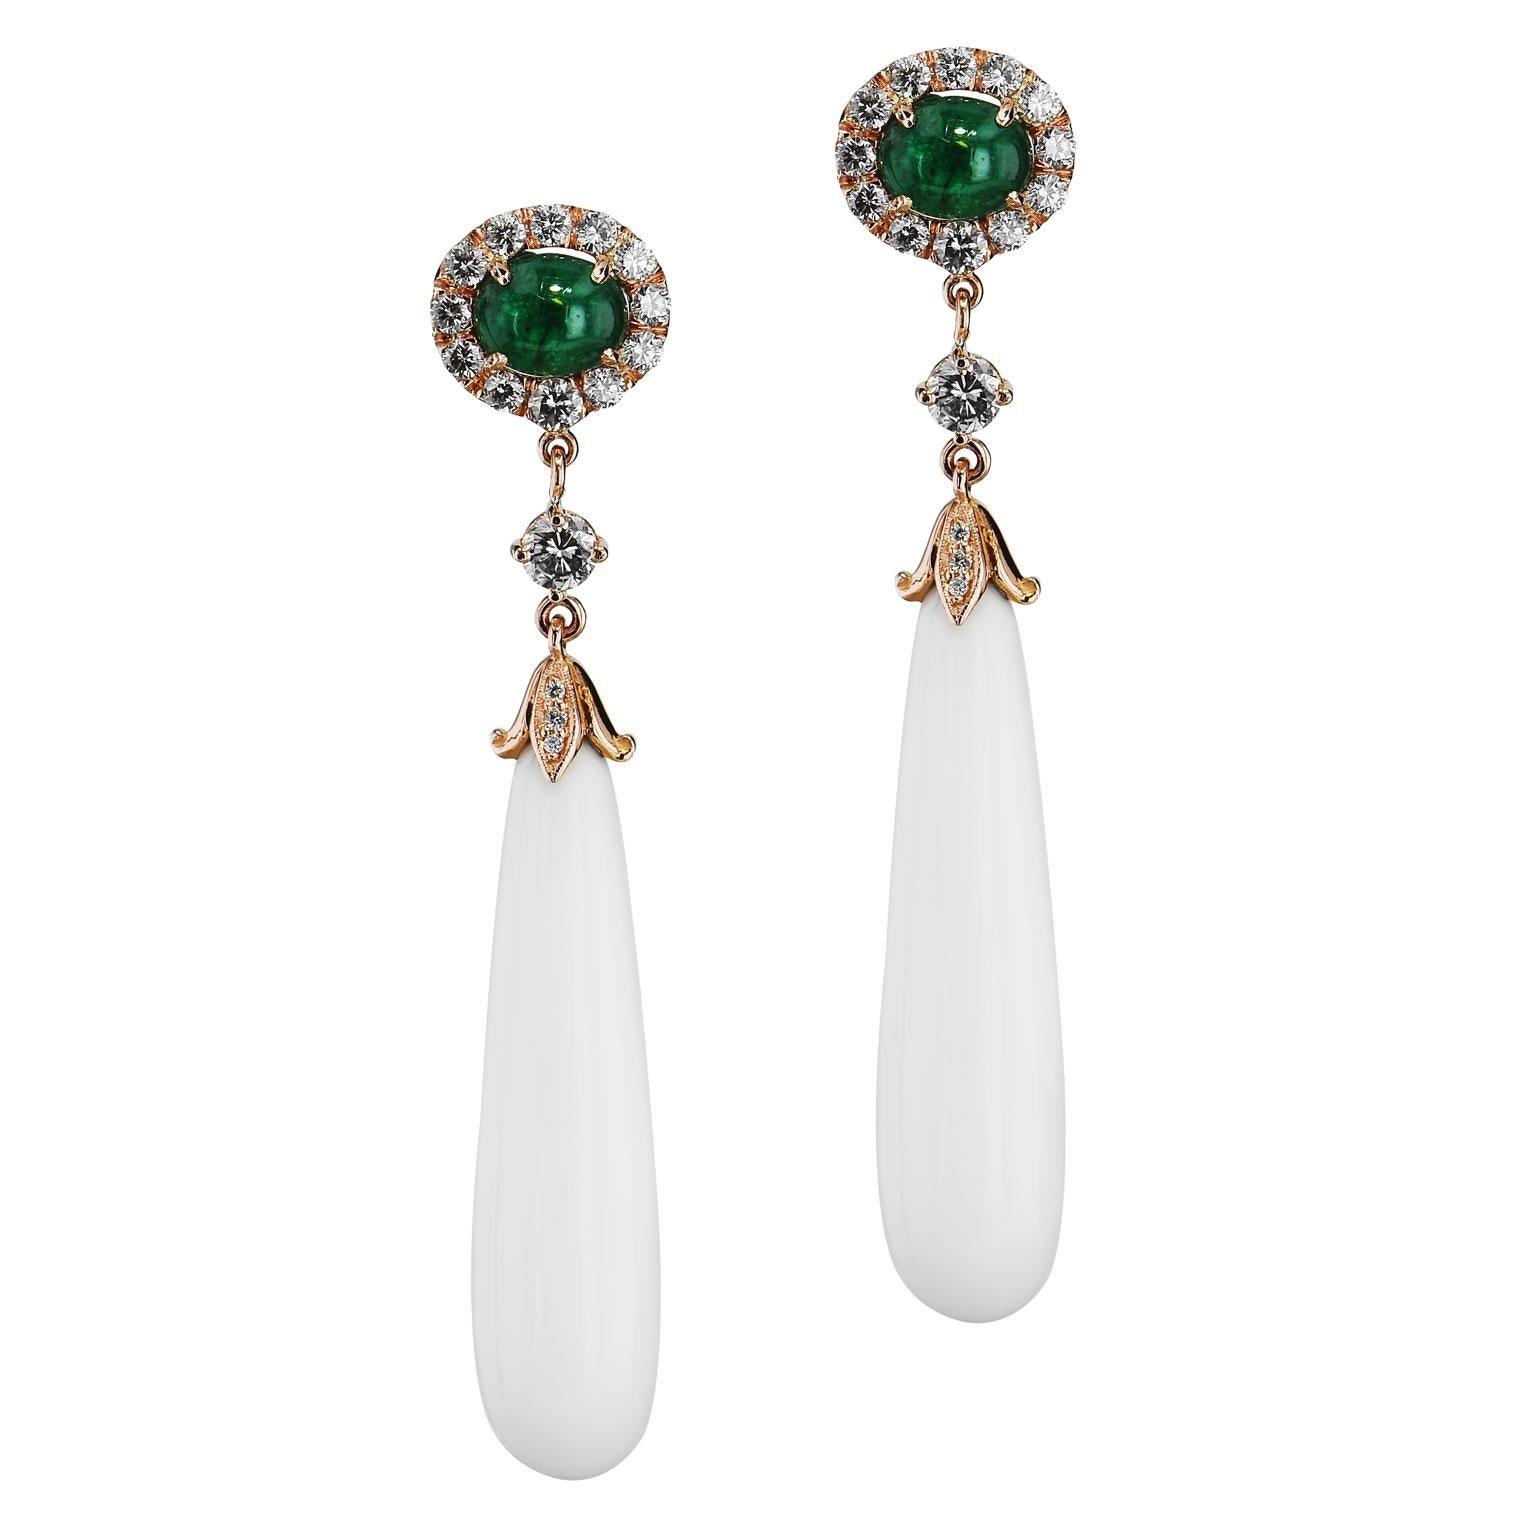 Crafted with love, these 18 karat rose gold Zambian Emerald White Agate Drop Earrings exude magnificence. Showcasing two emeralds, white Agate and brilliant cut diamonds pave. These earrings will make a stunning statement.

Zambian Emerald Agate